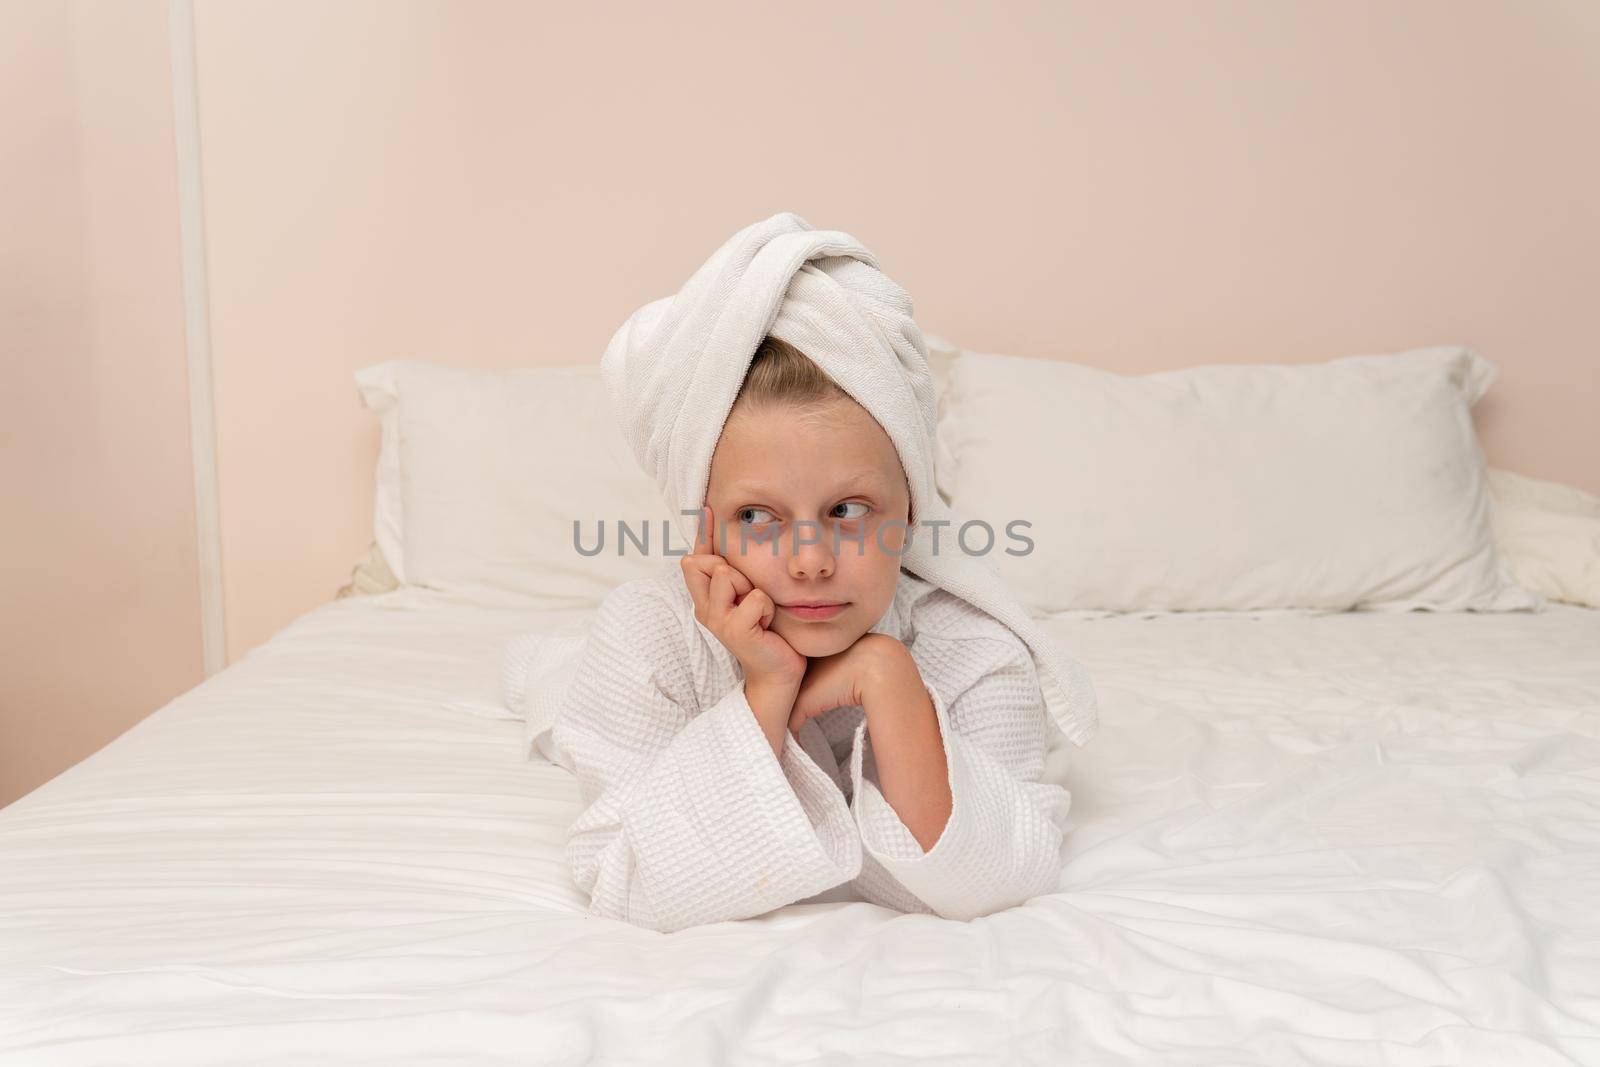 Thinks copyspace elbows smile coffee Creek bathrobe bed portrait morning, for bathroom dressing from hotel and person gown, take child. Hair health female, comfort